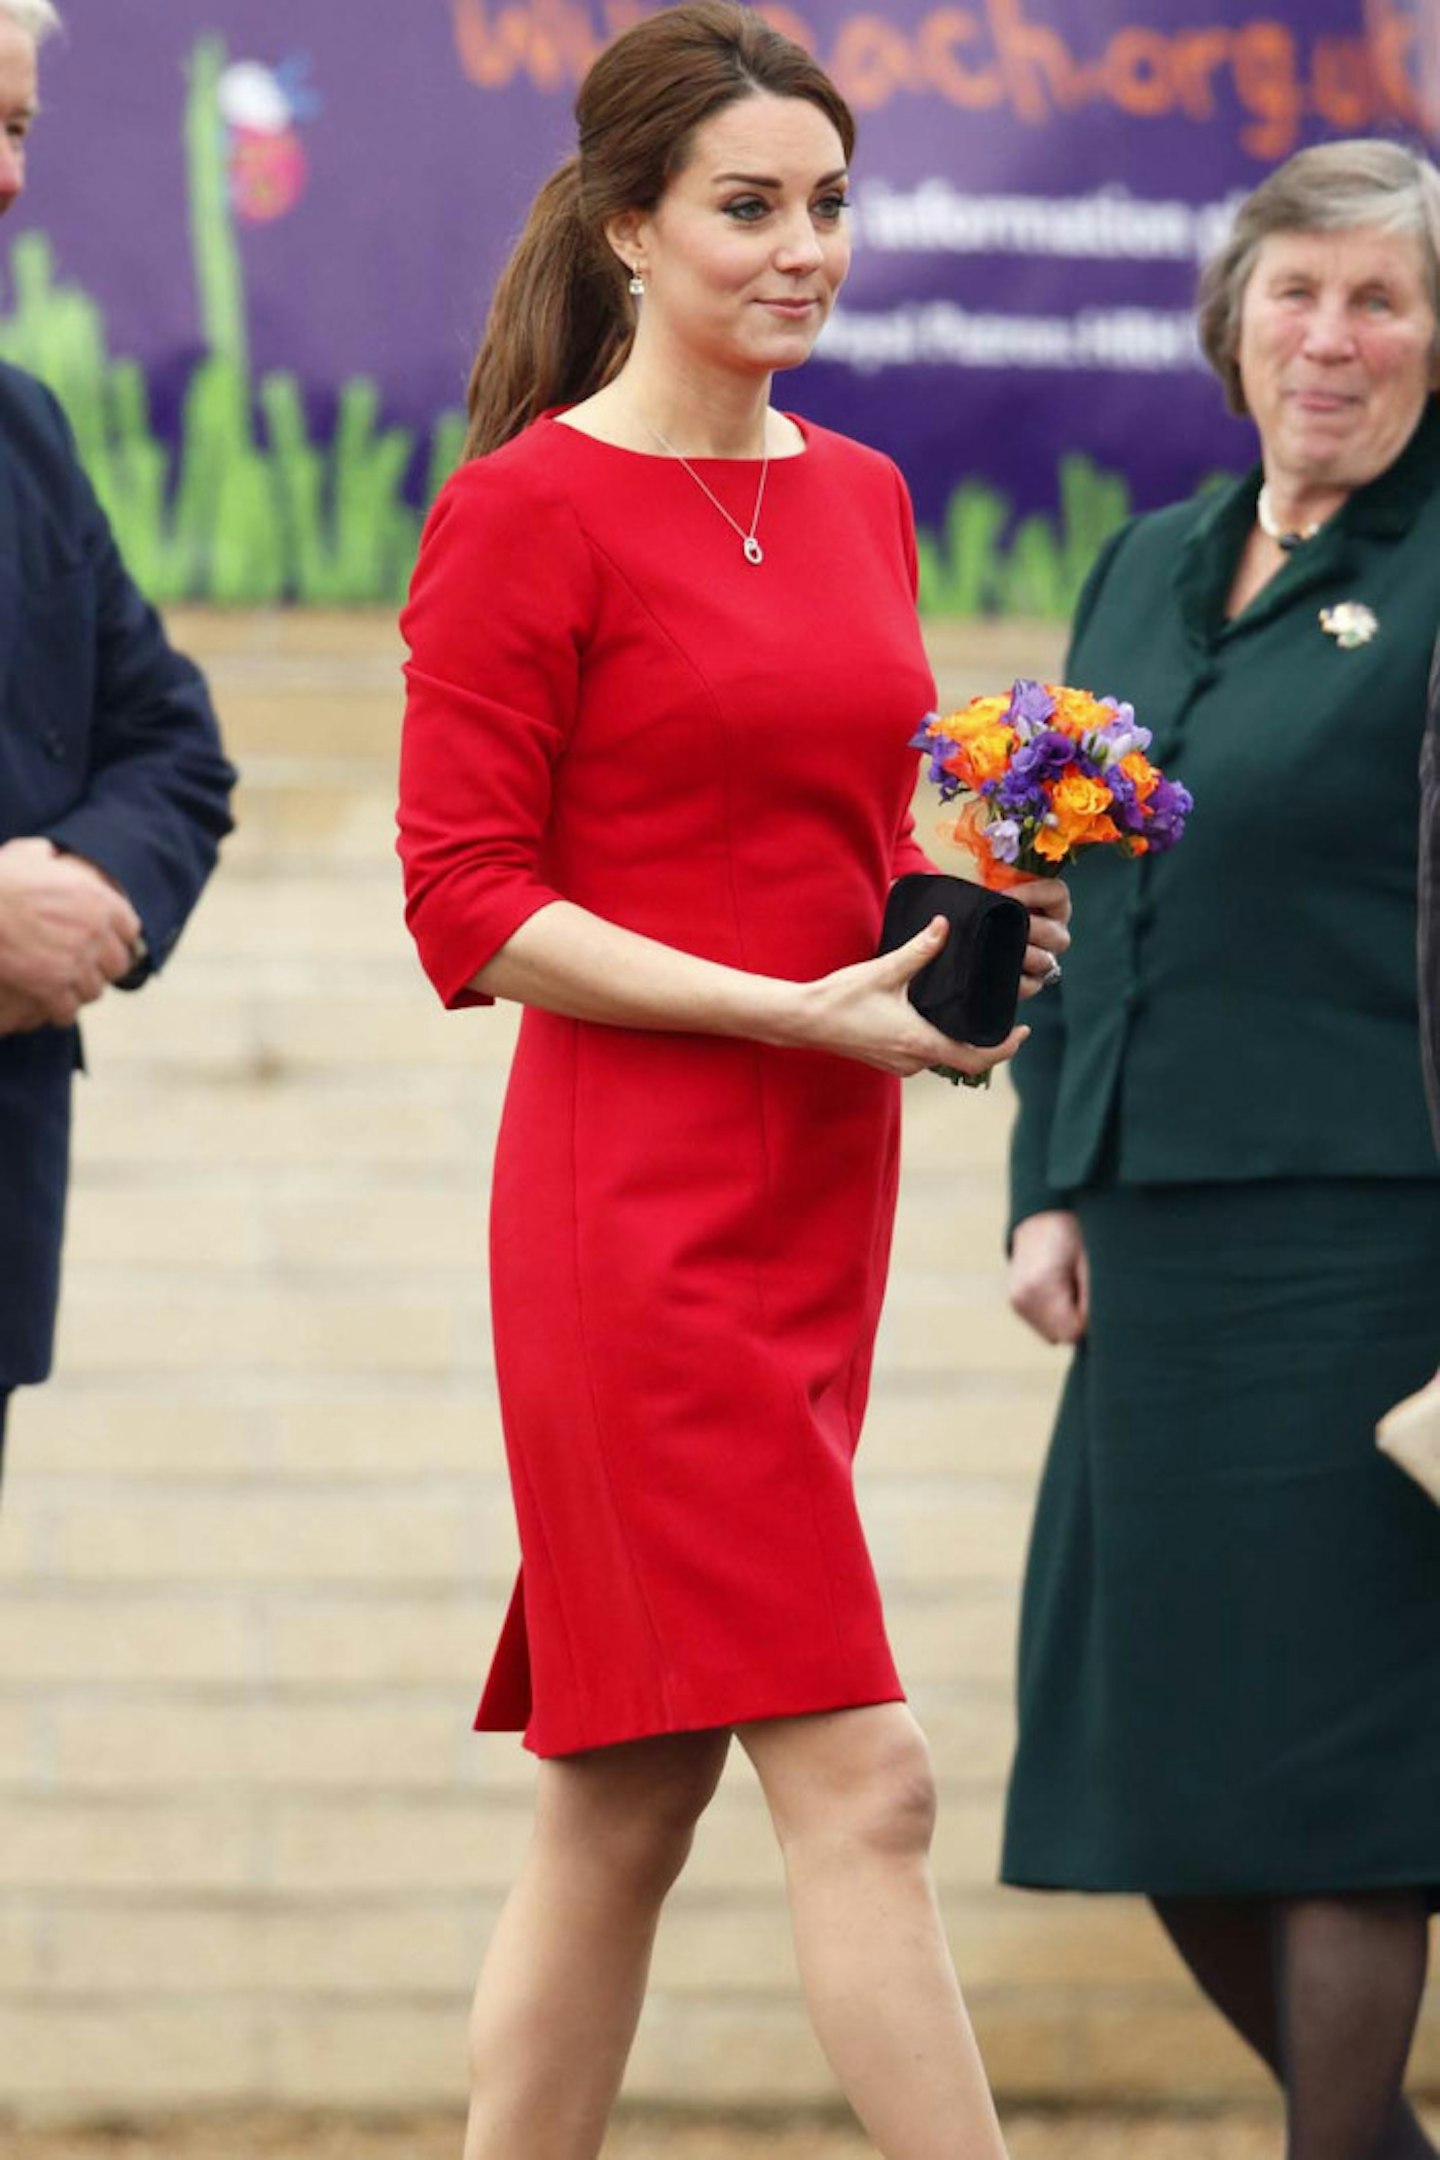 The Duchess Of Cambridge attends East Anglia's Children's Hospices Appeal Launch, 25 November 2014